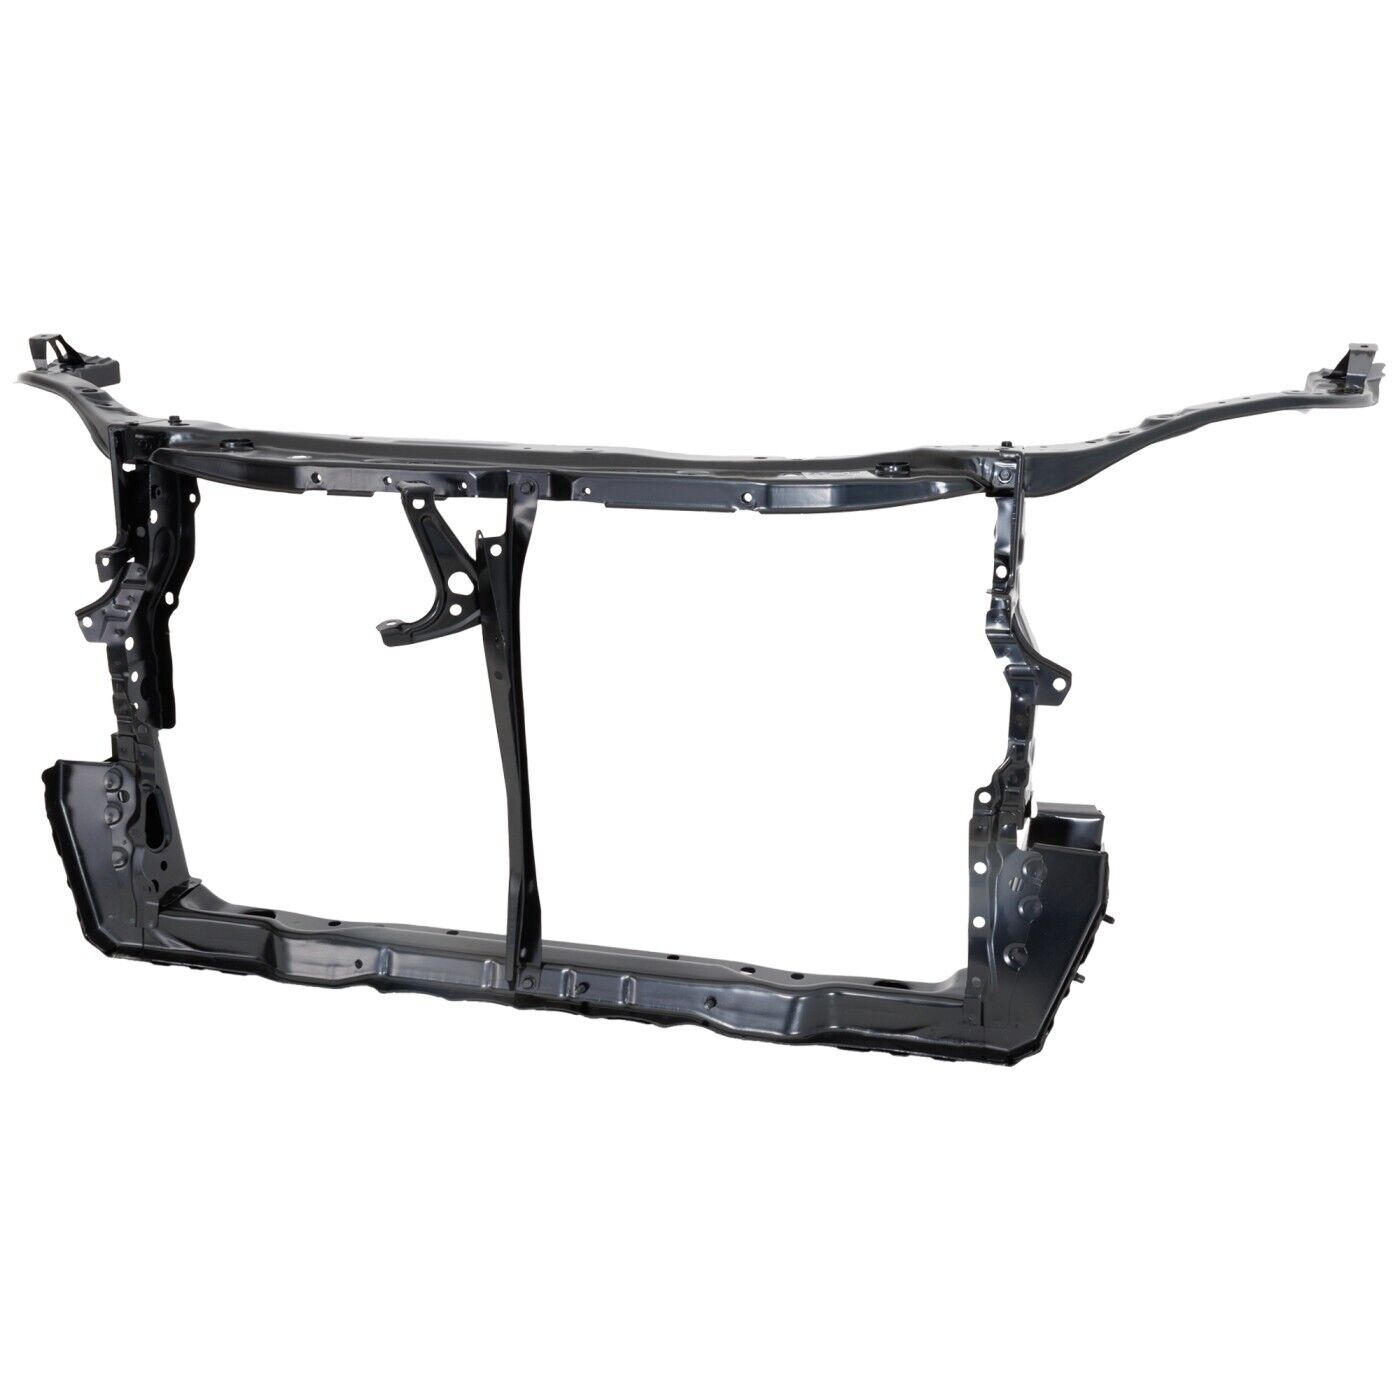 Radiator Support For 2012-2014 Toyota Camry Assembly